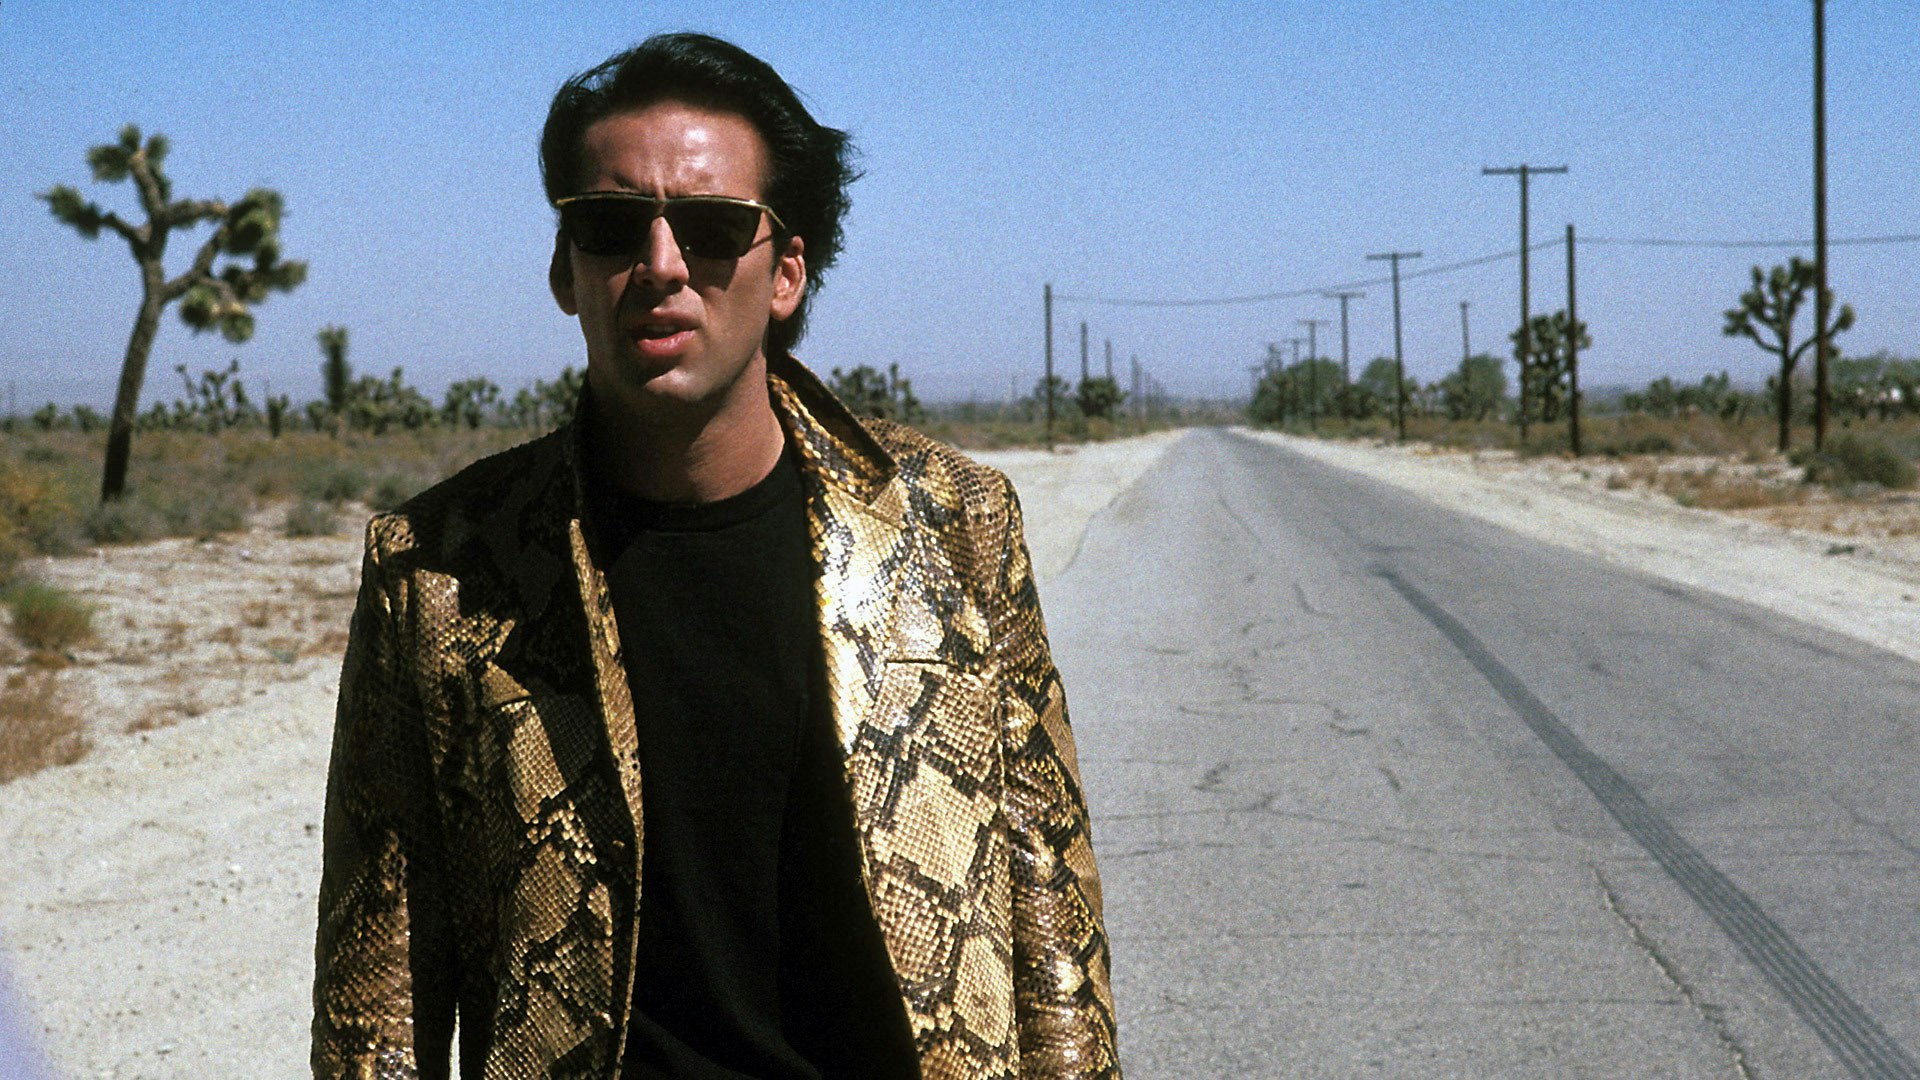 Wild at Heart (1990): There's No Need To Make Life Tougher Than It Has To Be